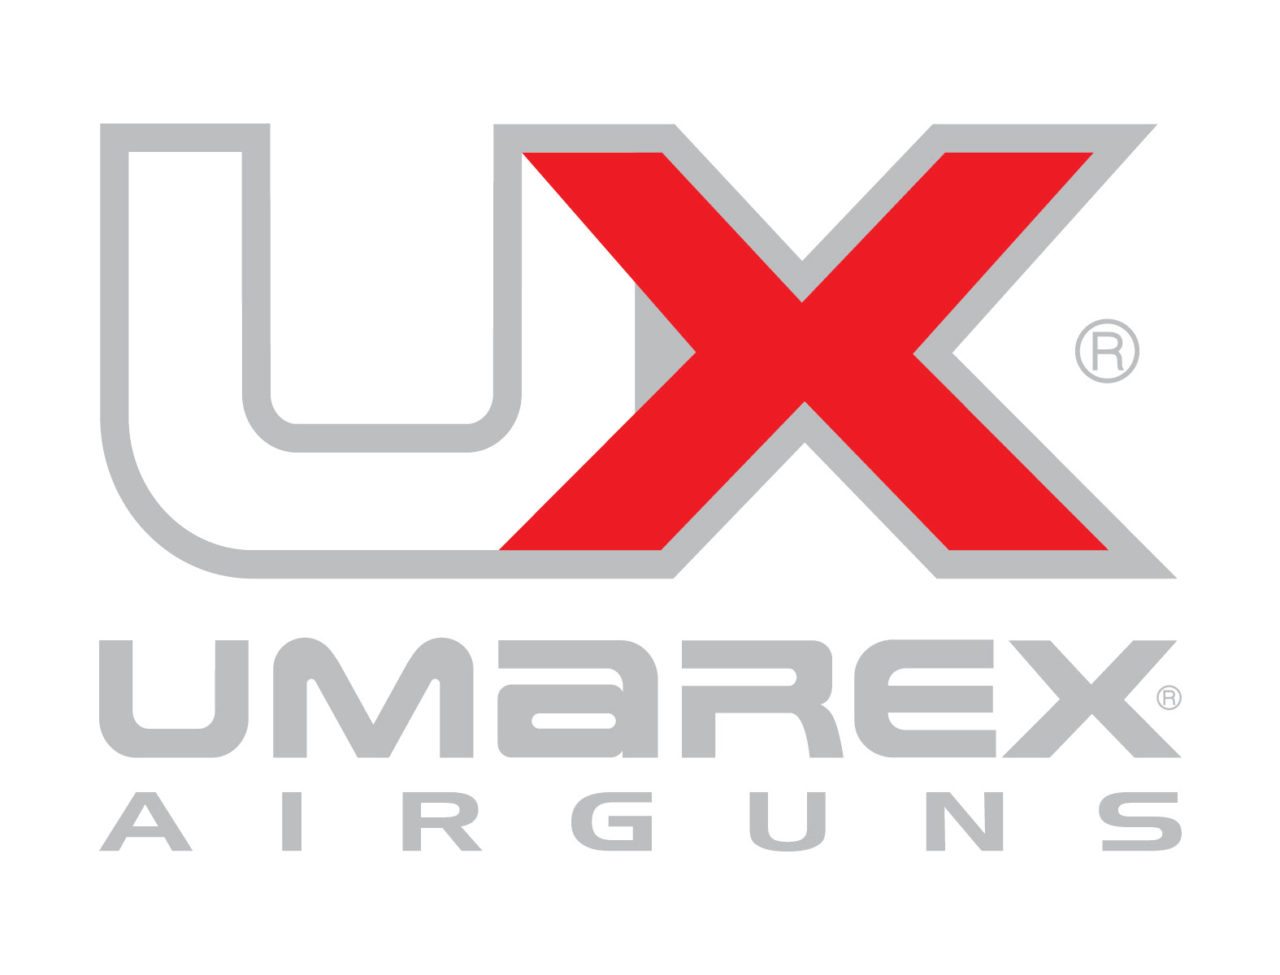 UMAREX USA TO ATTEND 2018 NRA ANNUAL MEETING & EXHIBITS